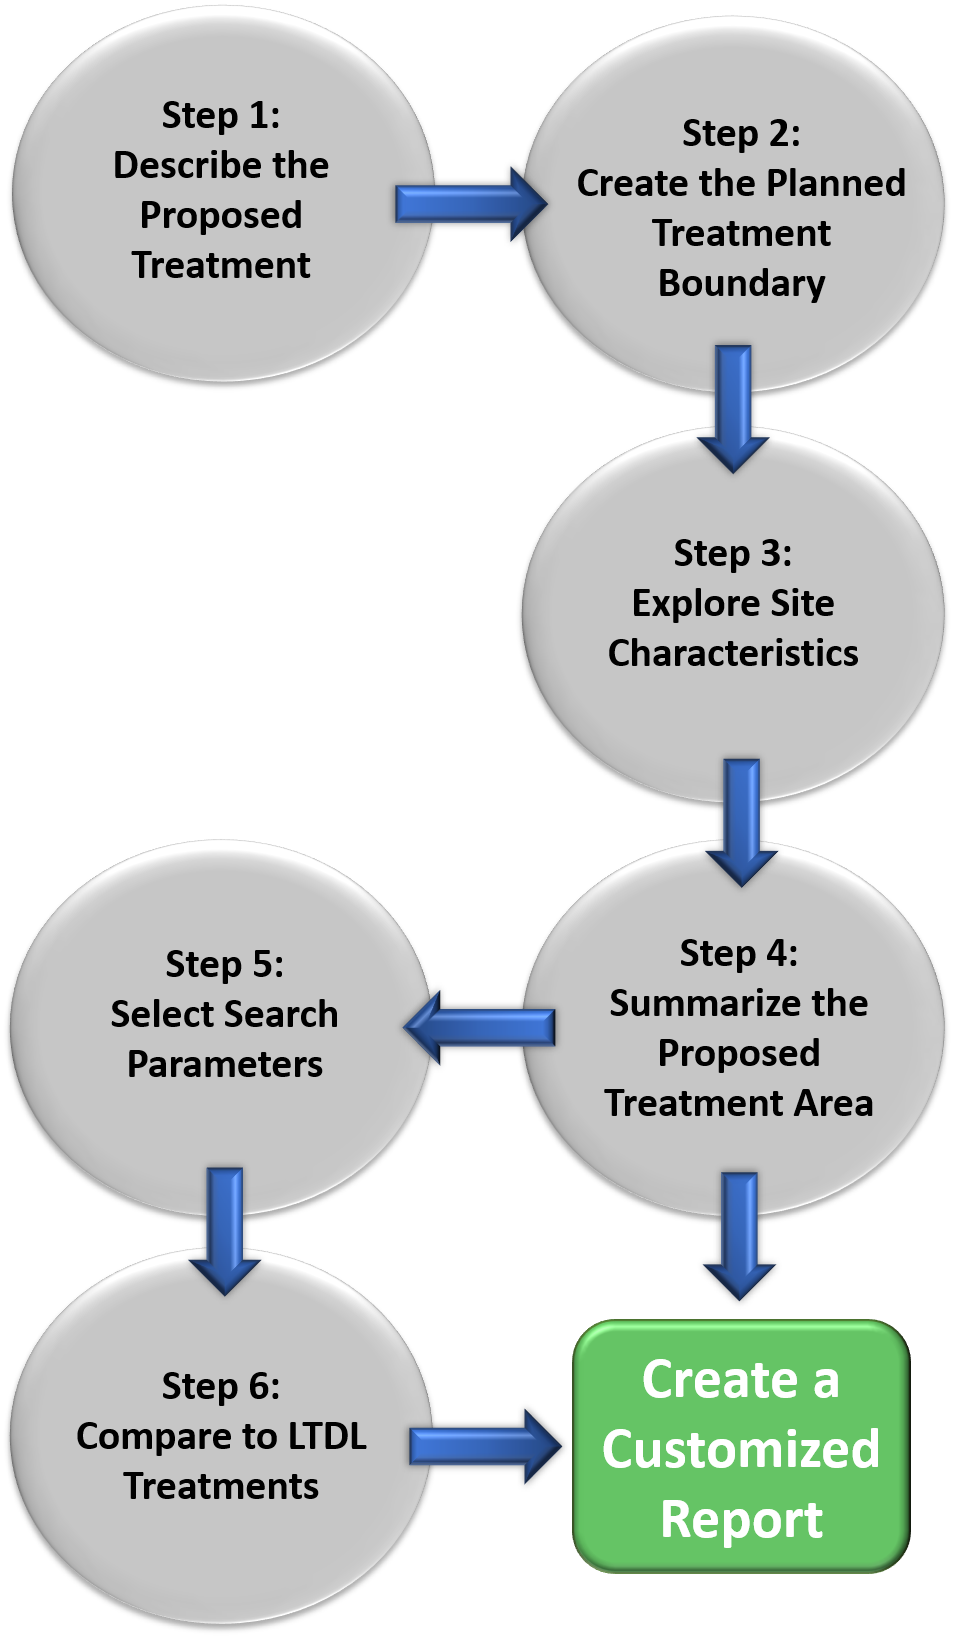 Image of the Land treatment exploration tool user guide conceptual diagram